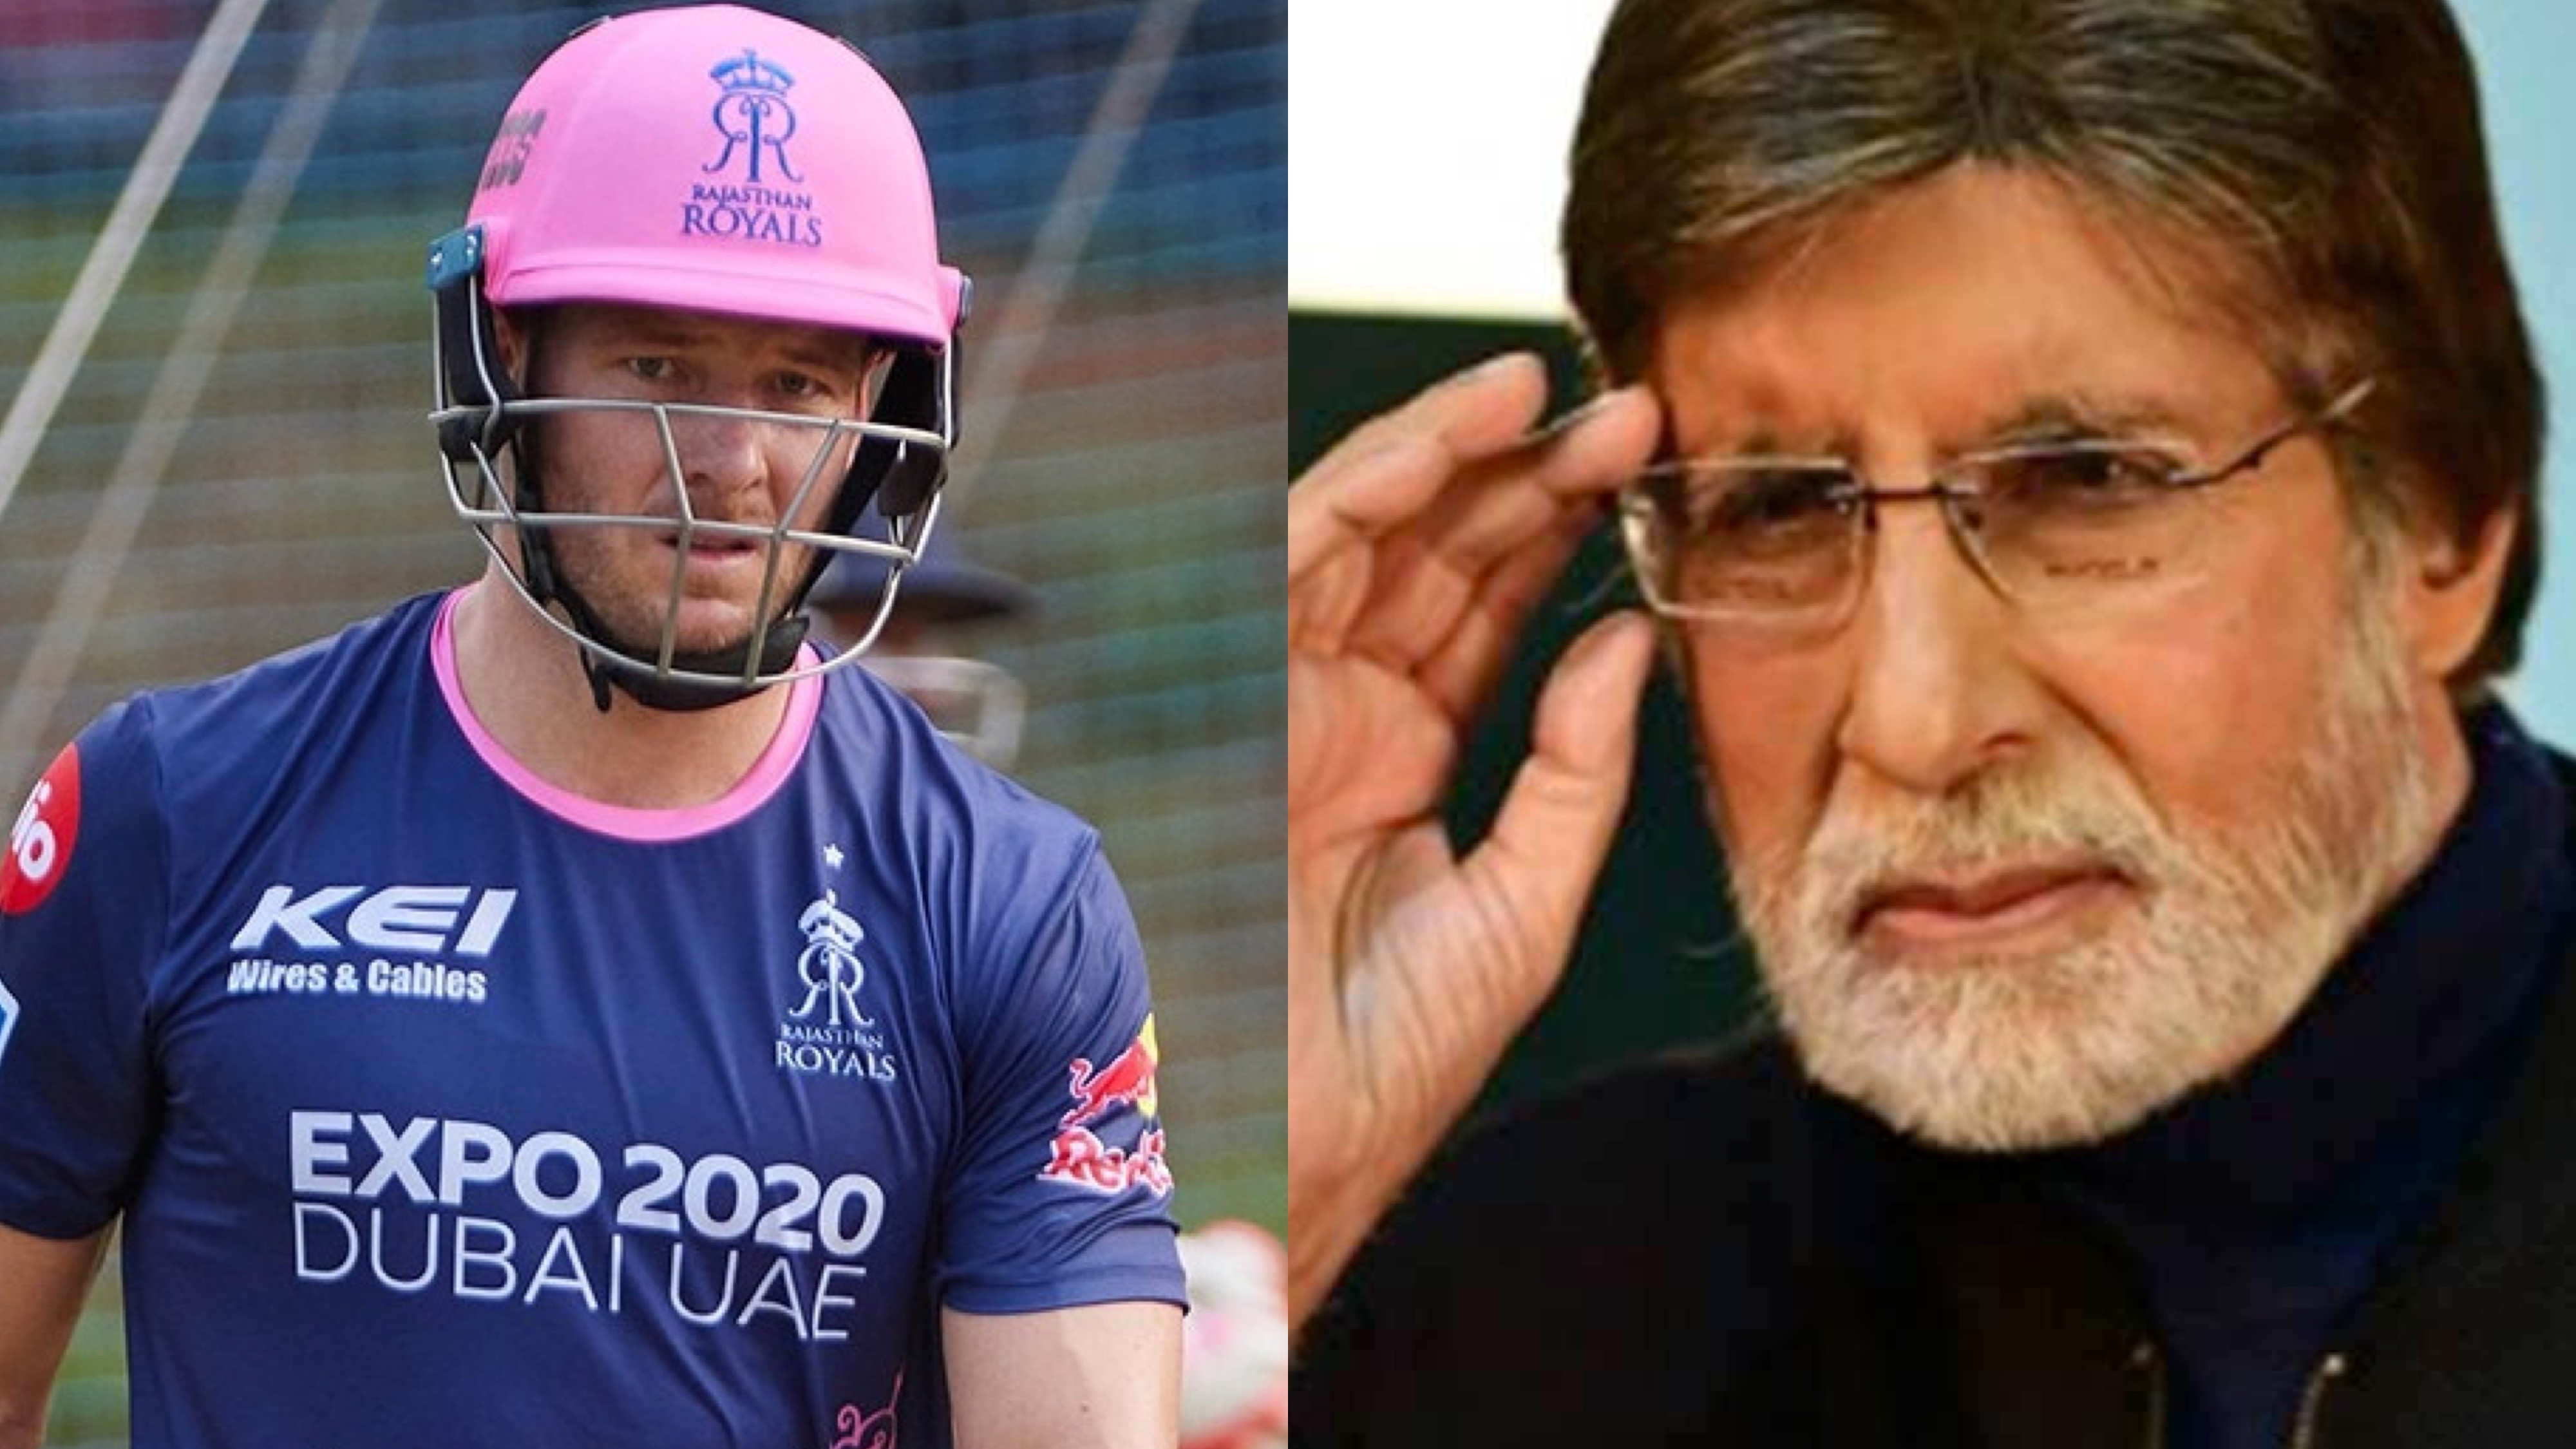 IPL 2021: David Miller surprises fans with a Hindi movie meme featuring Amitabh Bachchan 